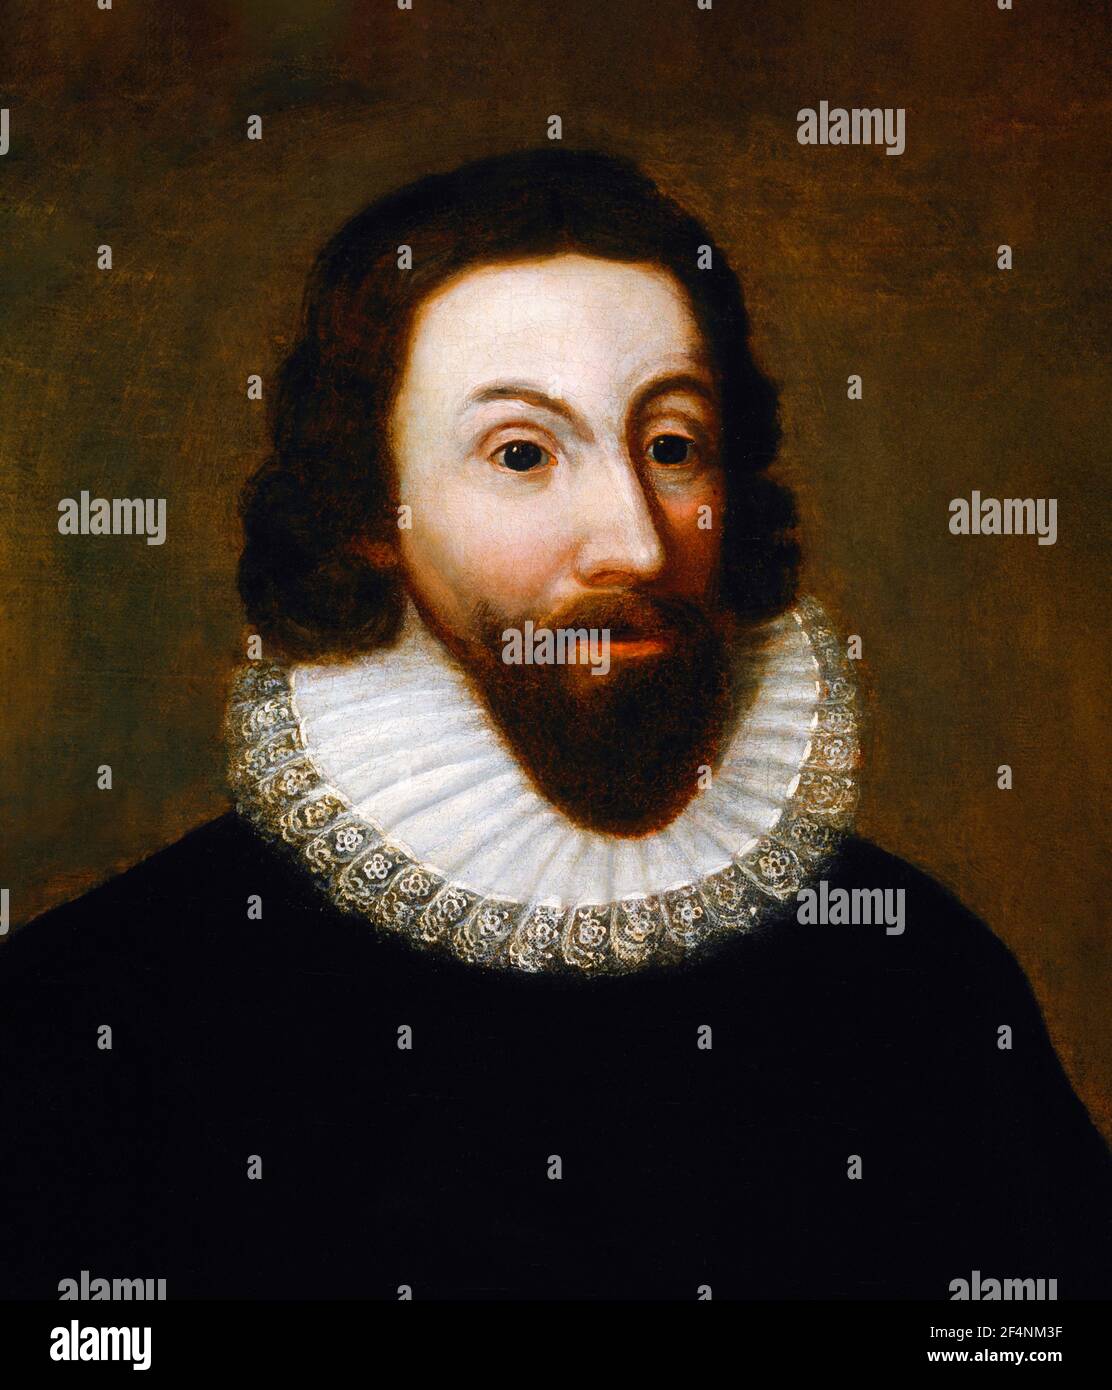 John Winthrop. Portrait of the English Puritan lawyer and first Governor of the Massachusetts Bay Colony, John Winthrop (1587/88-1649), oil on canvas, unknown artist, c. 1800 after an early 17th century painting Stock Photo